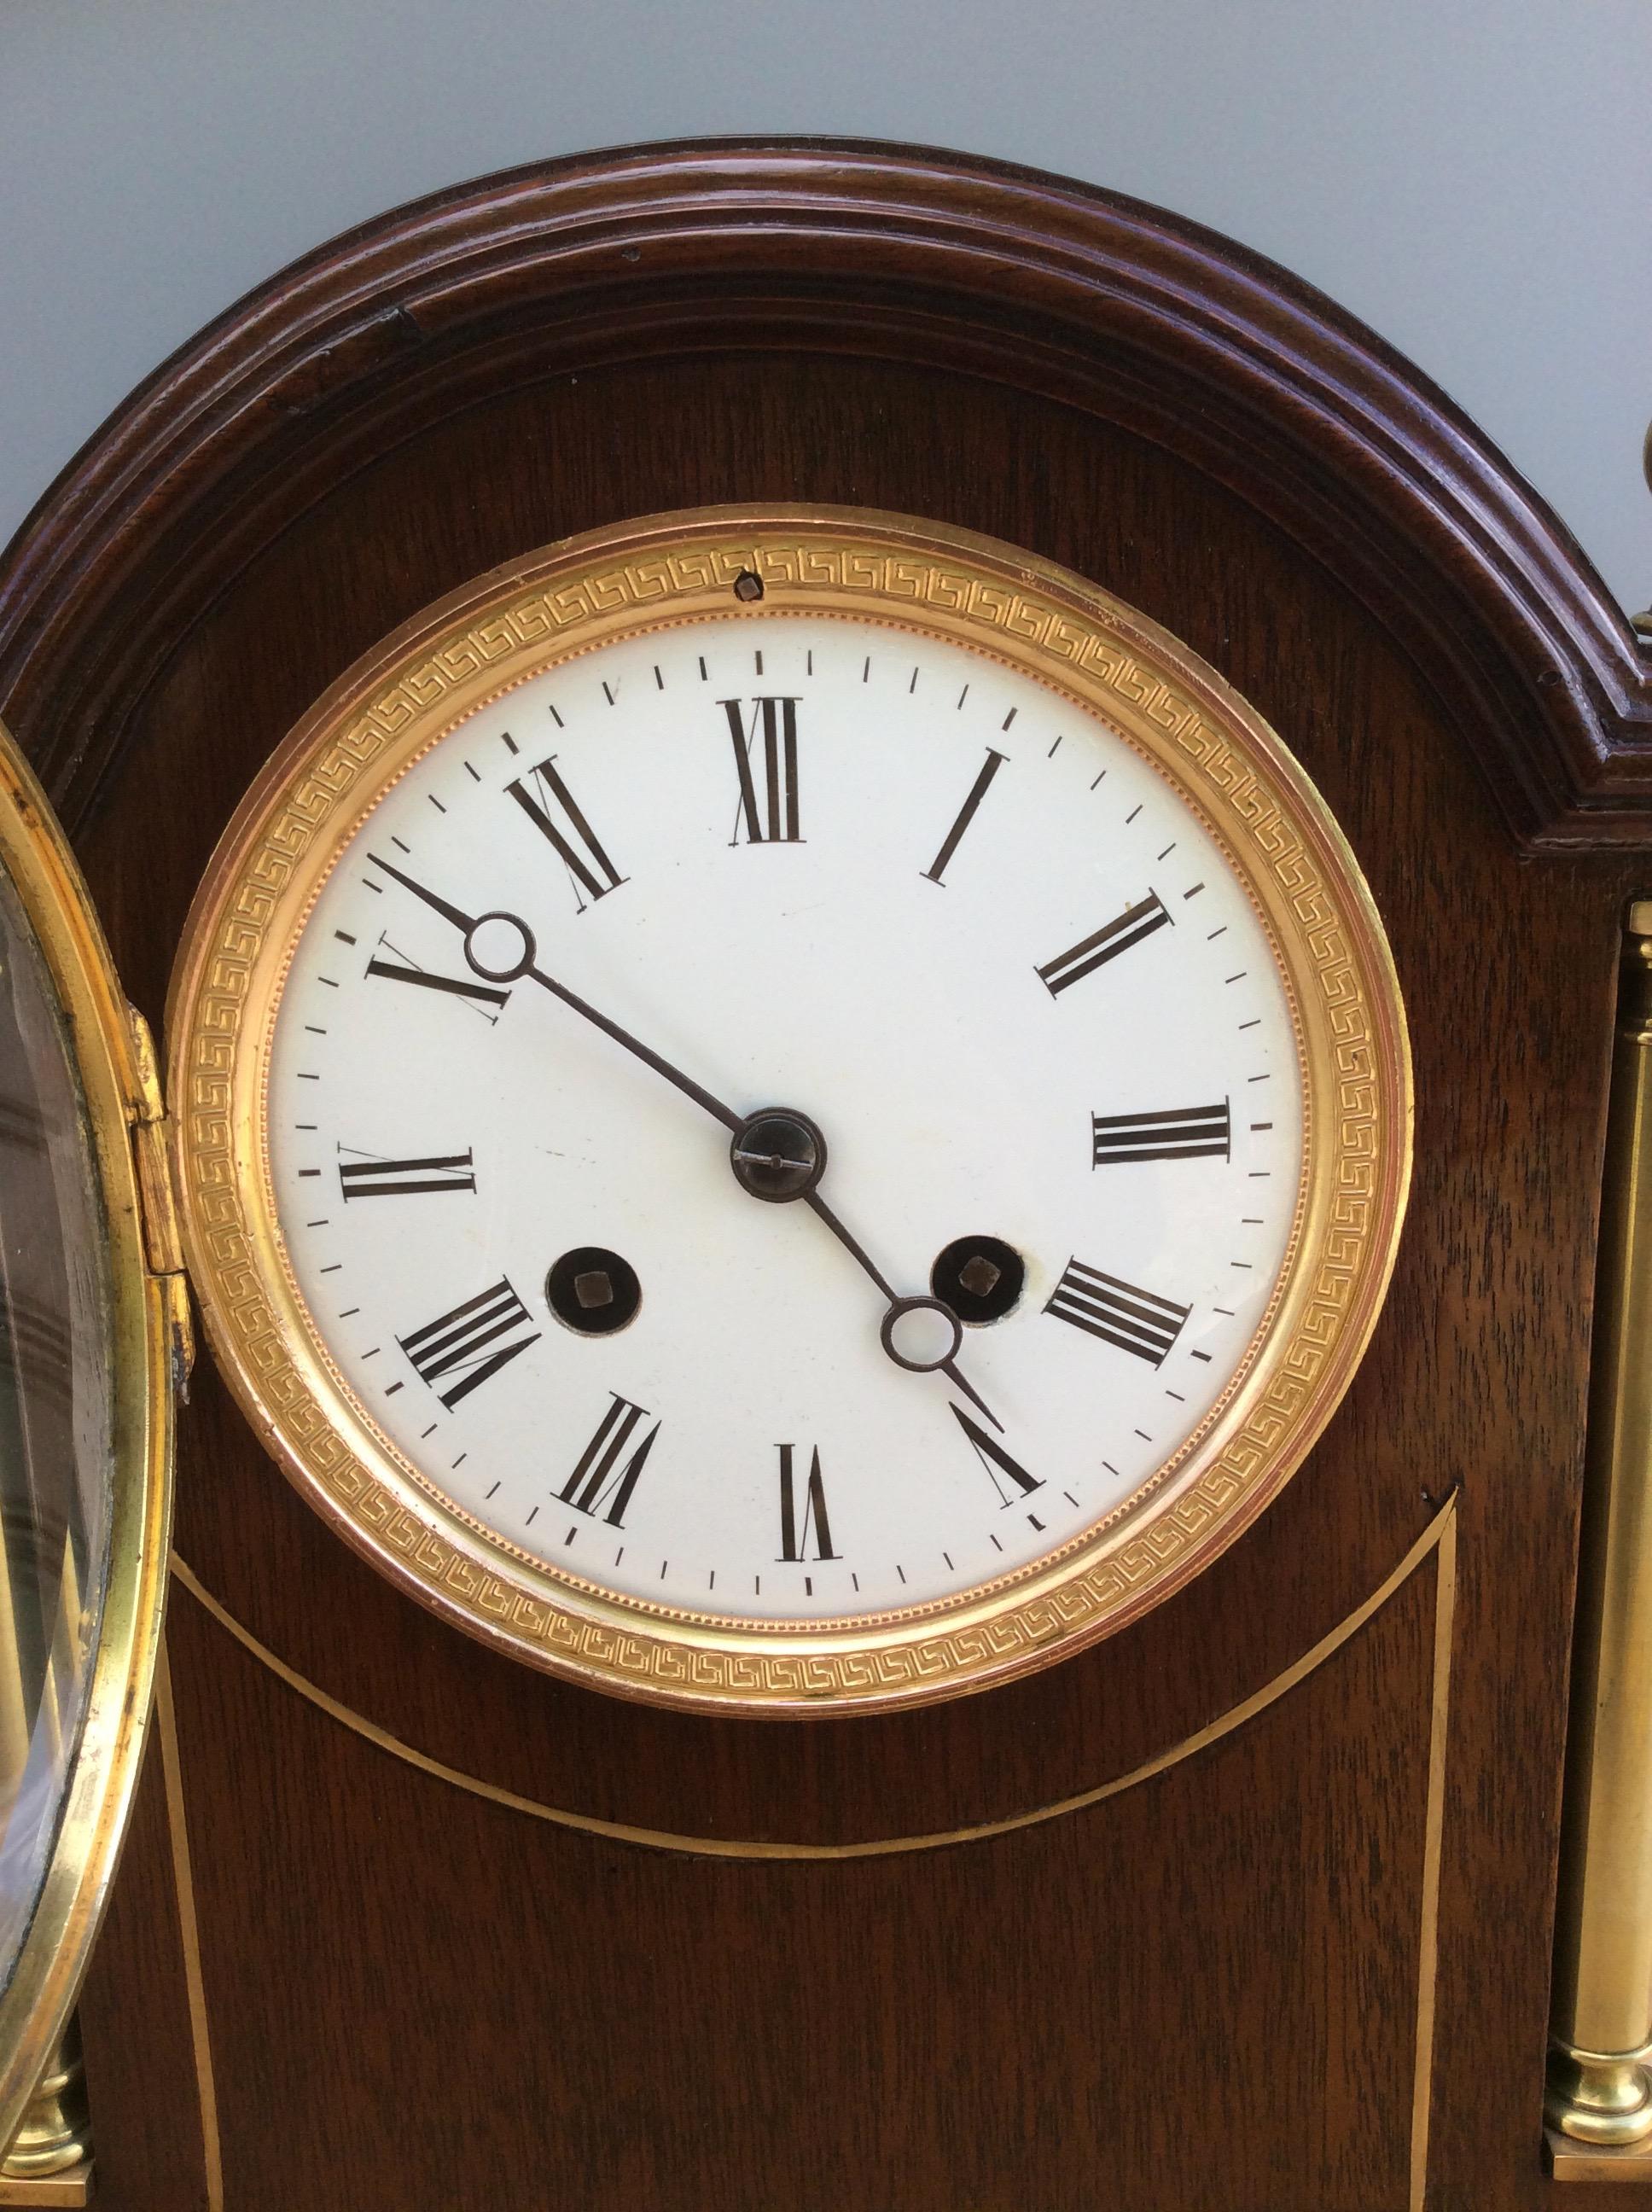 Mahogany mantel clock in a break arch case with brass columns to either side, brass inlay to the front and surmounted by four brass finials.

Beautifully decorated brass bezel, enamel dial with Roman numerals and original ‘blued’ steel